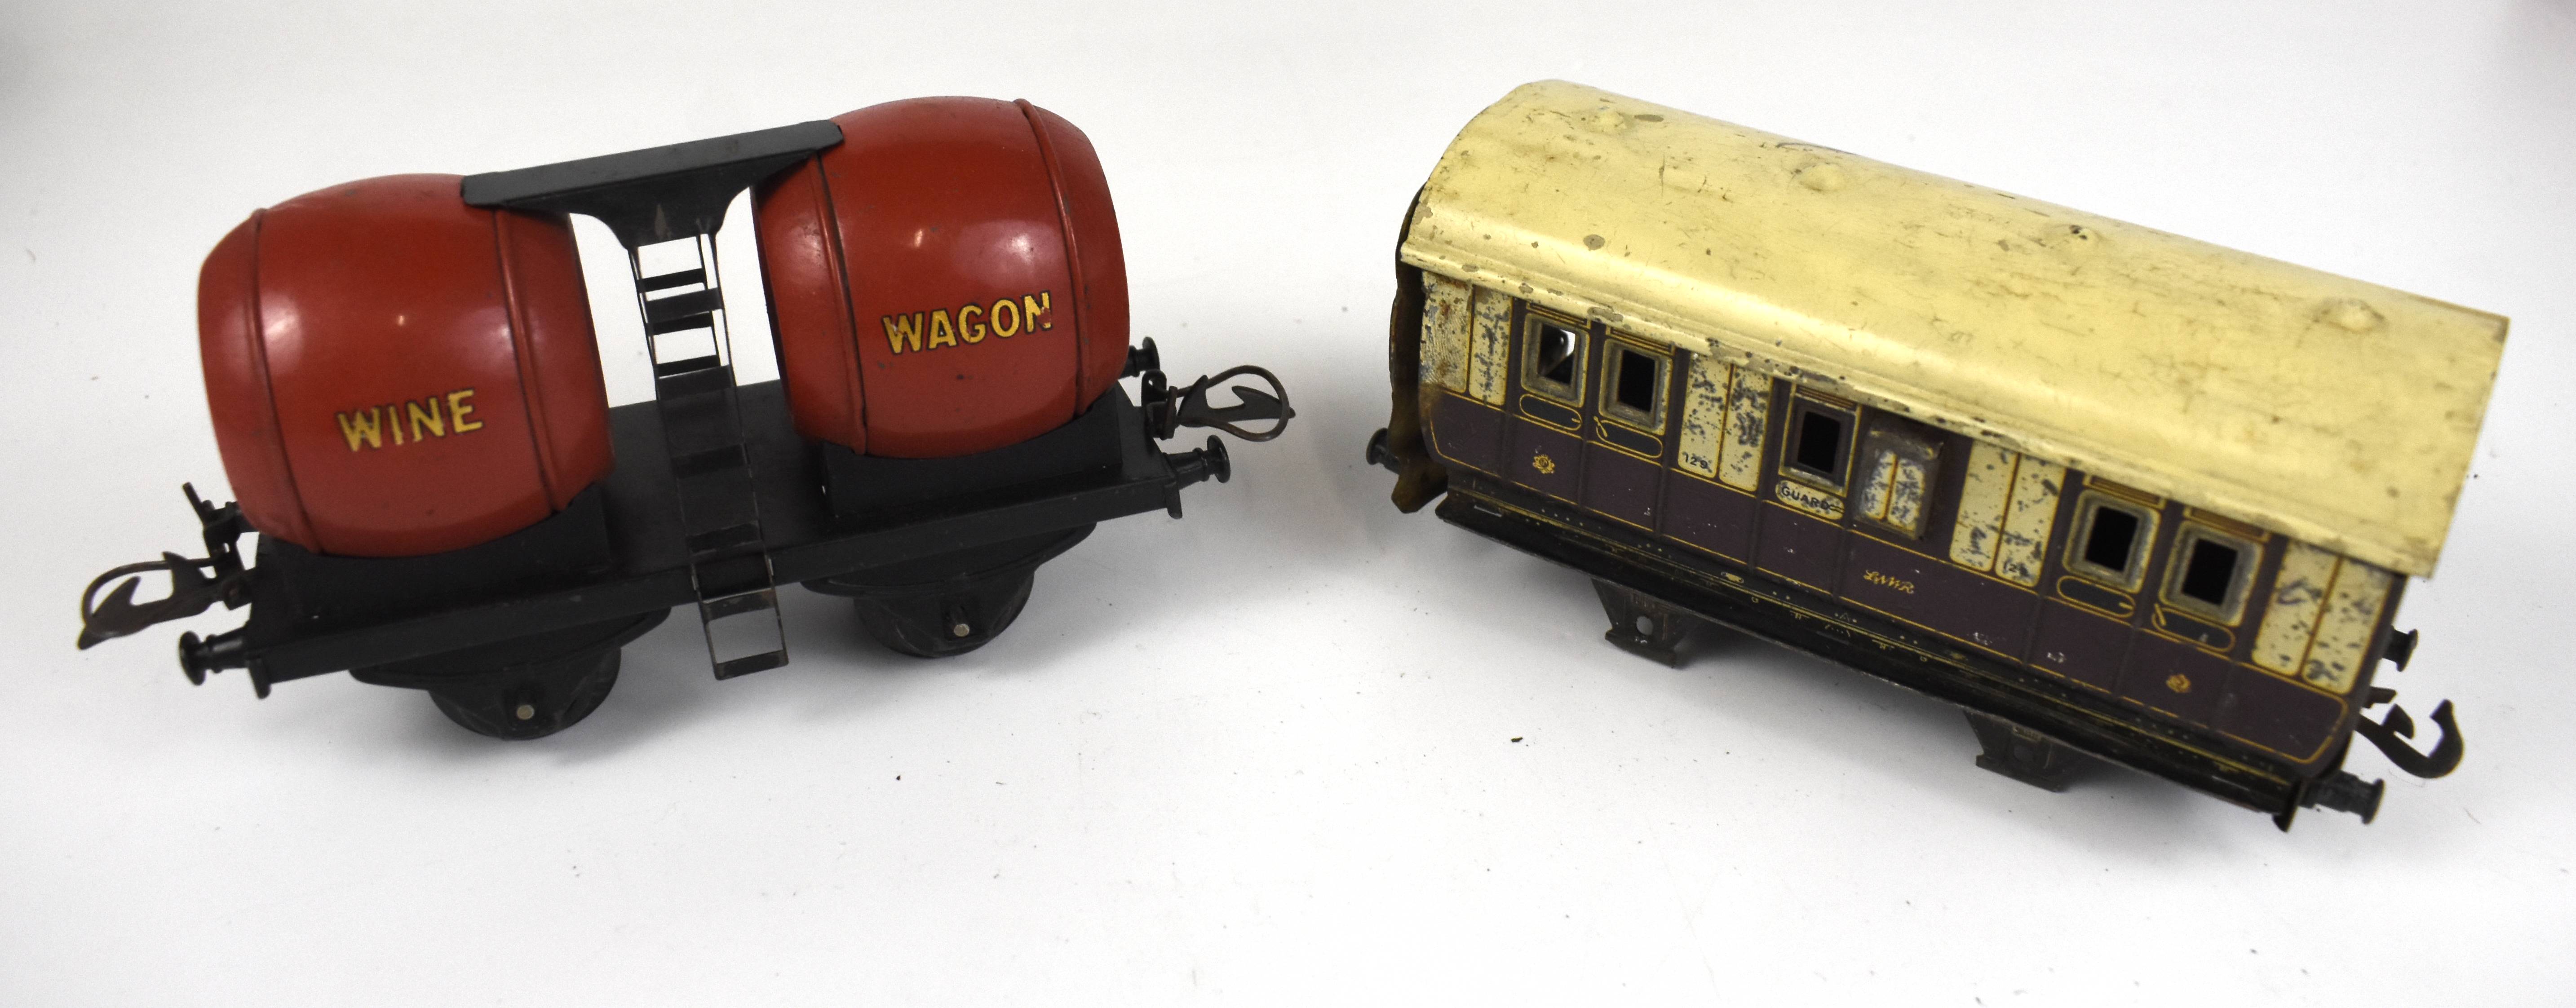 Boxed Hornby series Meccano ‘Wine Wagon’ Double Barrel gauge 0, RS686 and boxed Hornby Series no 2 - Image 2 of 4